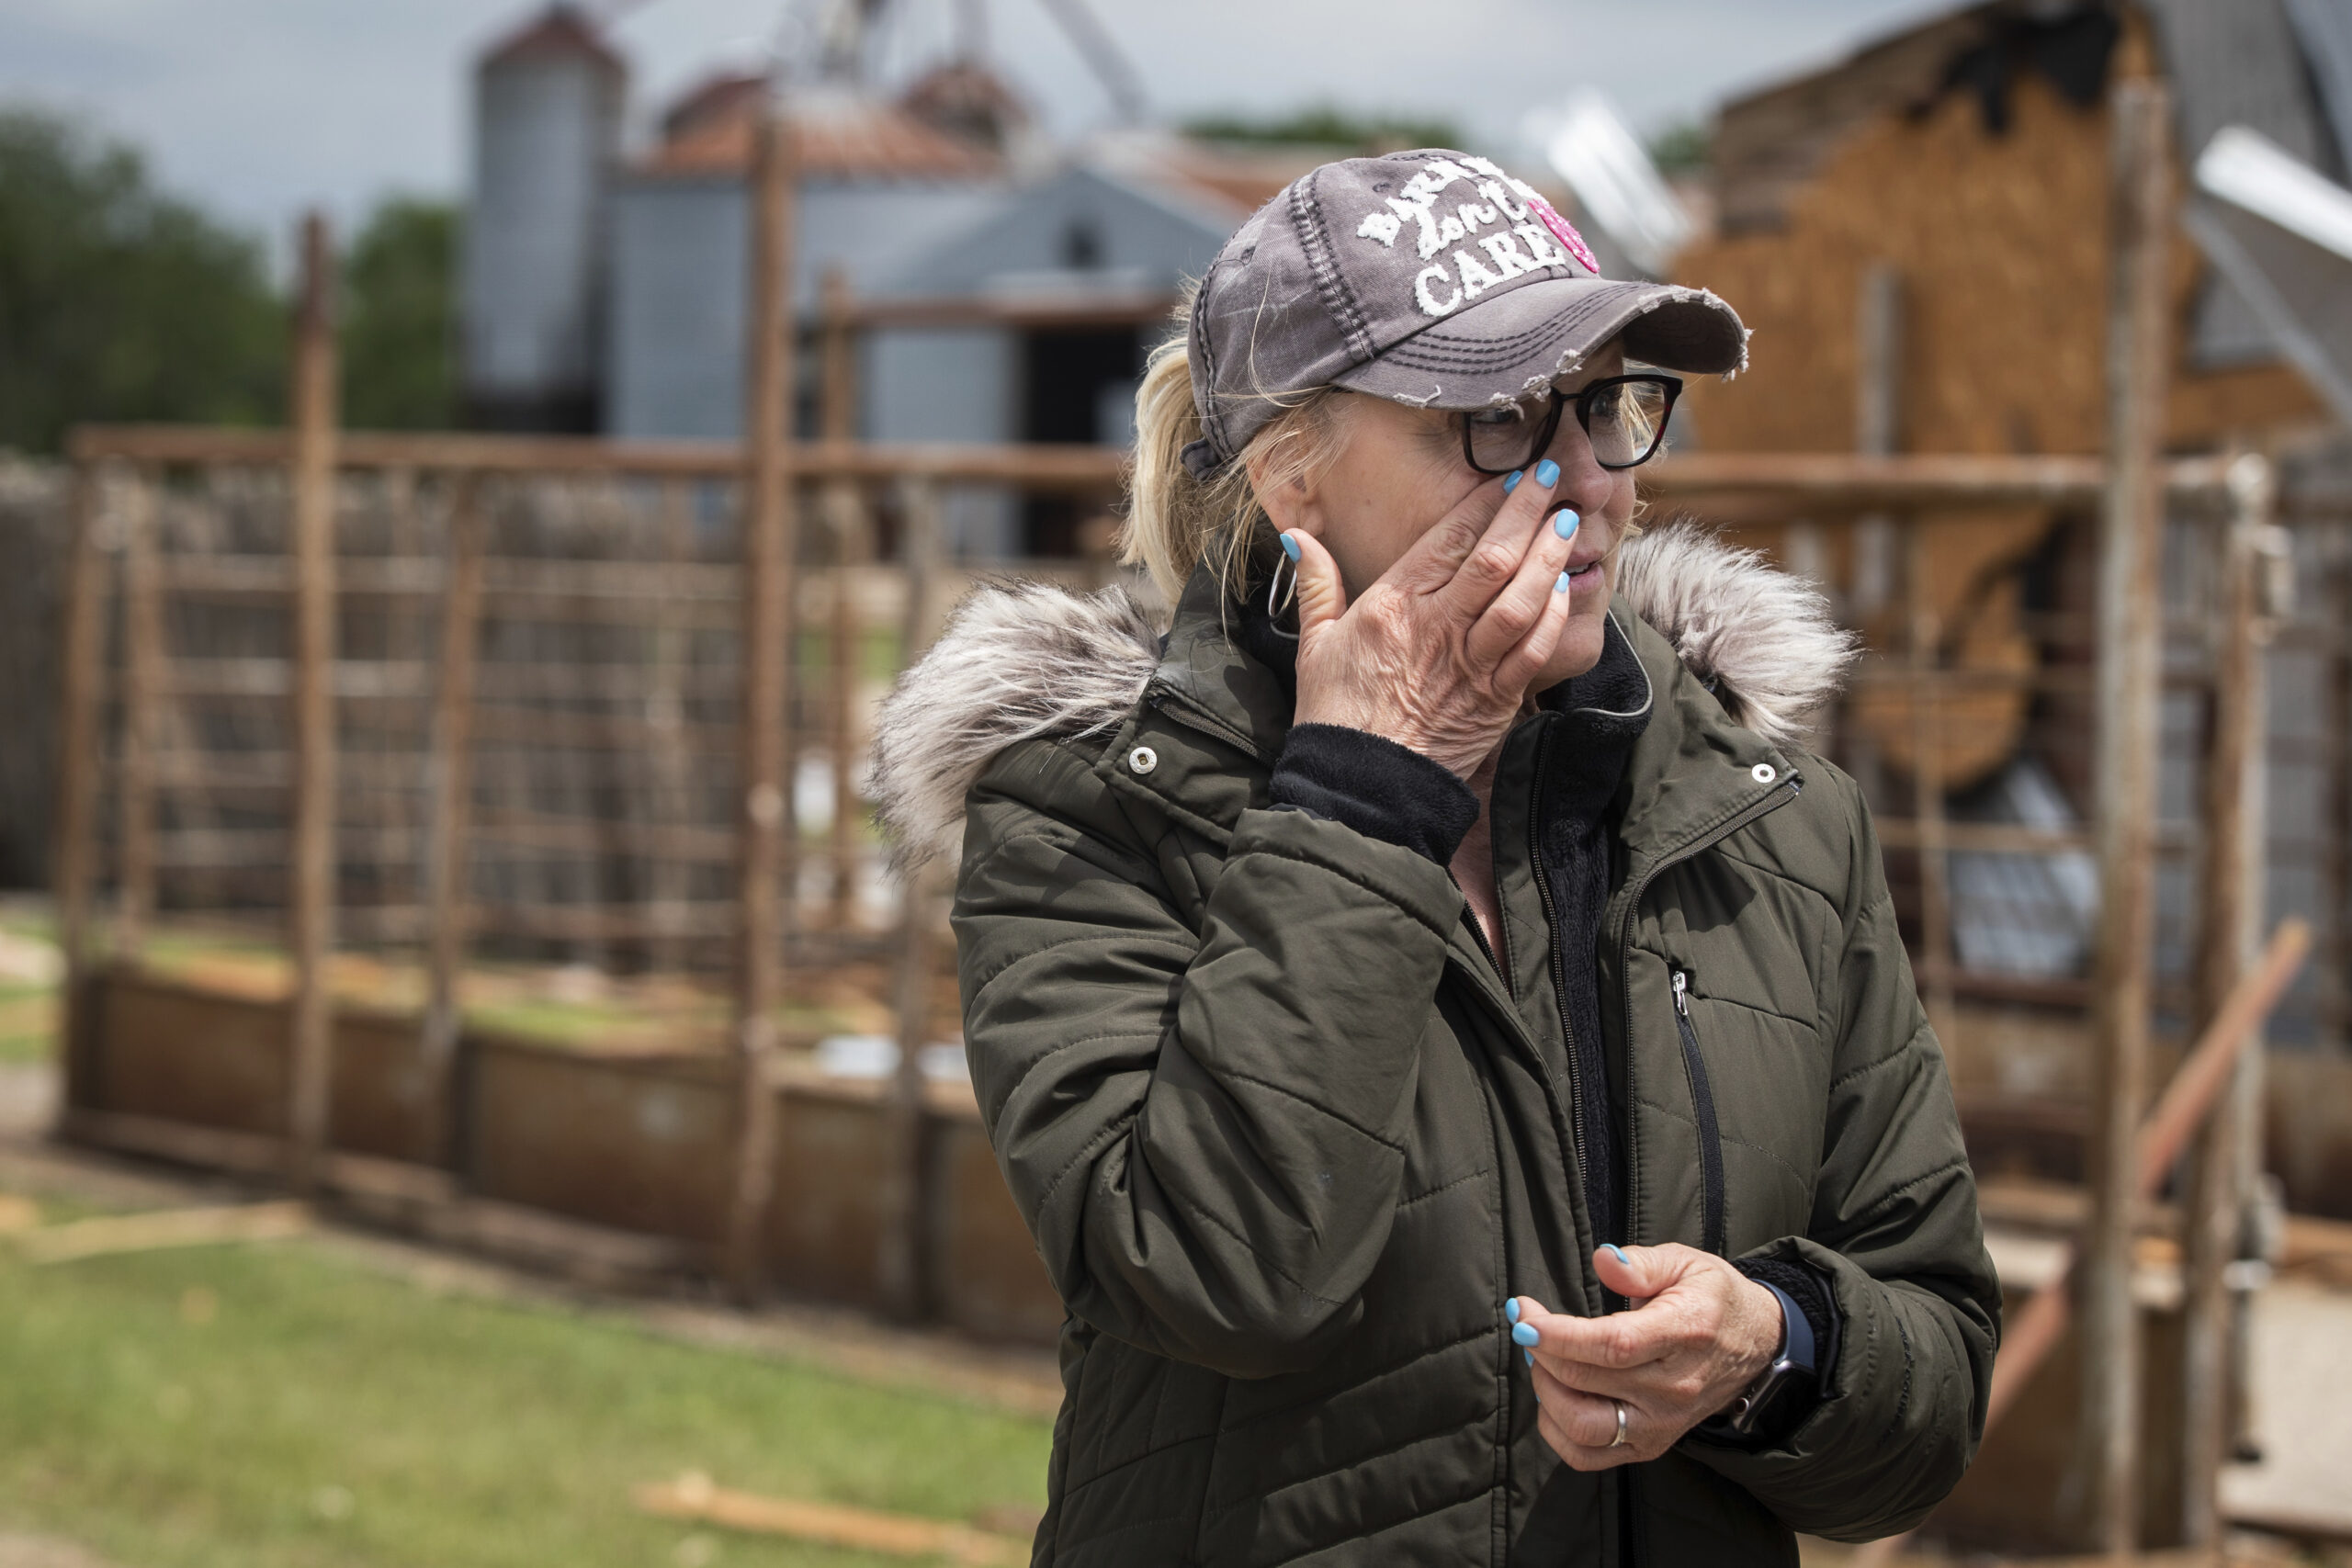  Cathy Haley wipes away tears while looking over damage caused by a tornado Tuesday, May 4, 2021, at Barn on the Brazos in Blum, Texas. (Yffy Yossifor/Star-Telegram via AP)